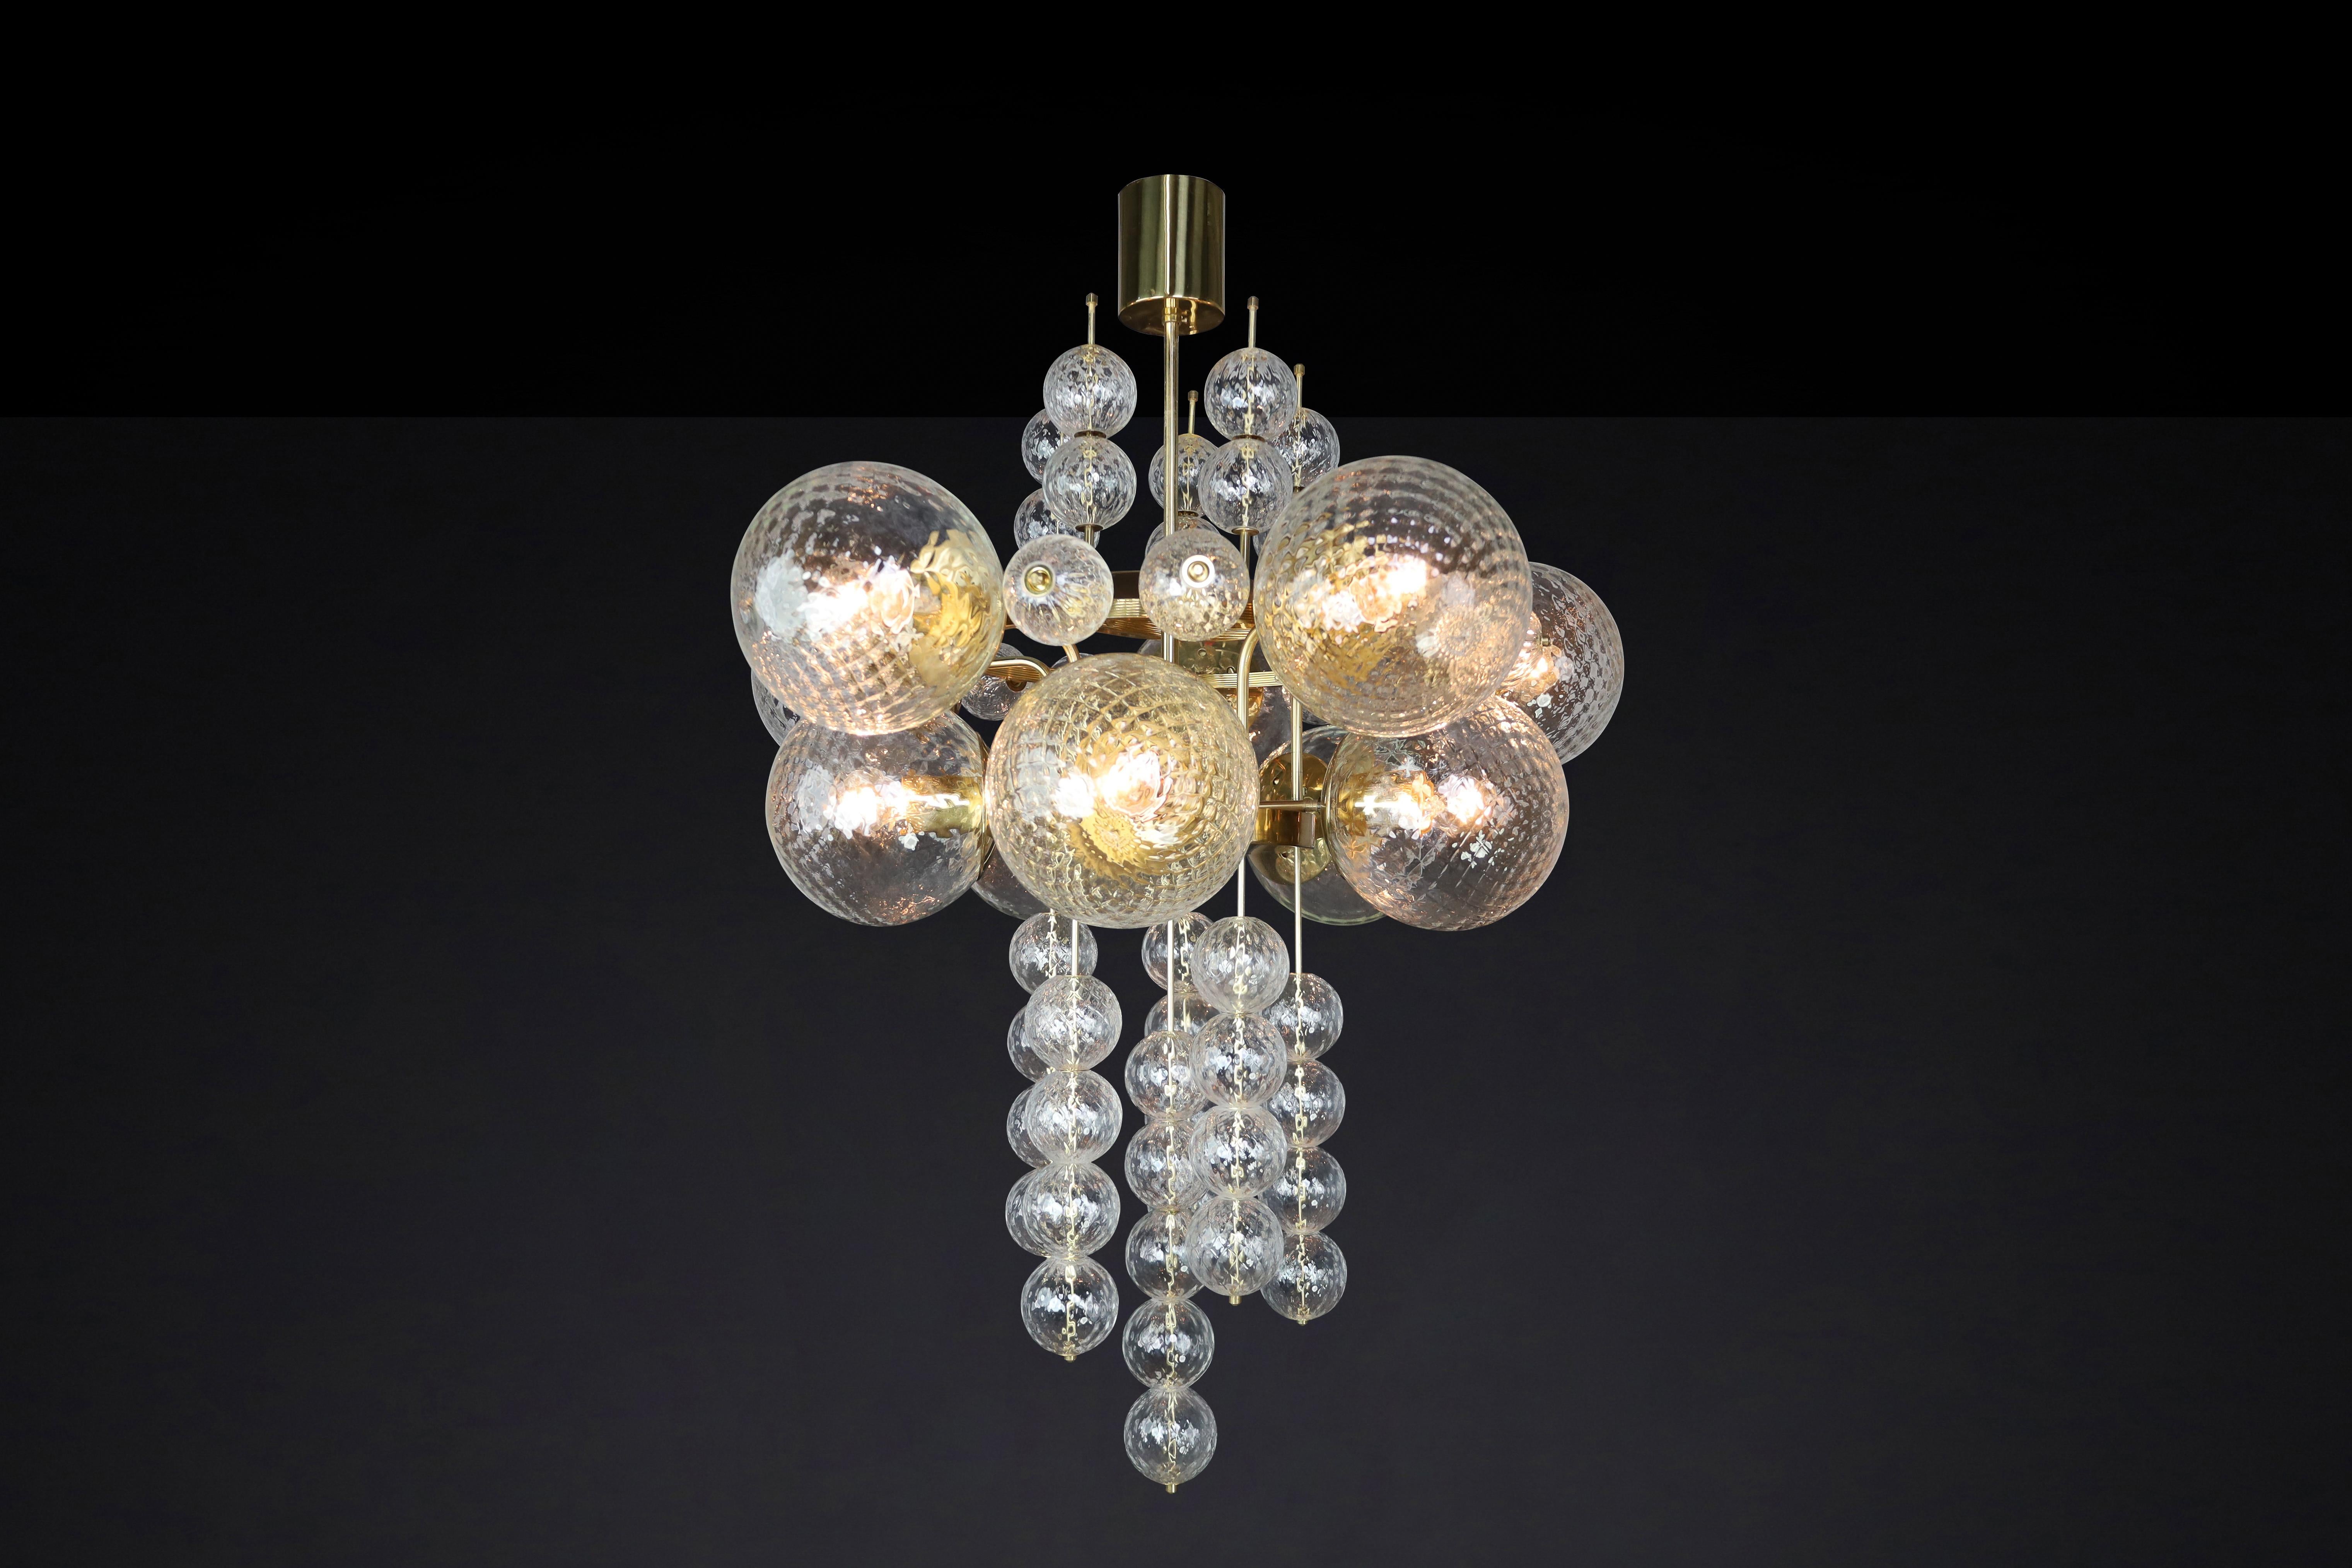 Czech Large Chandelier with brass fixture and hand-blowed glass globes by Preciosa Cz. For Sale